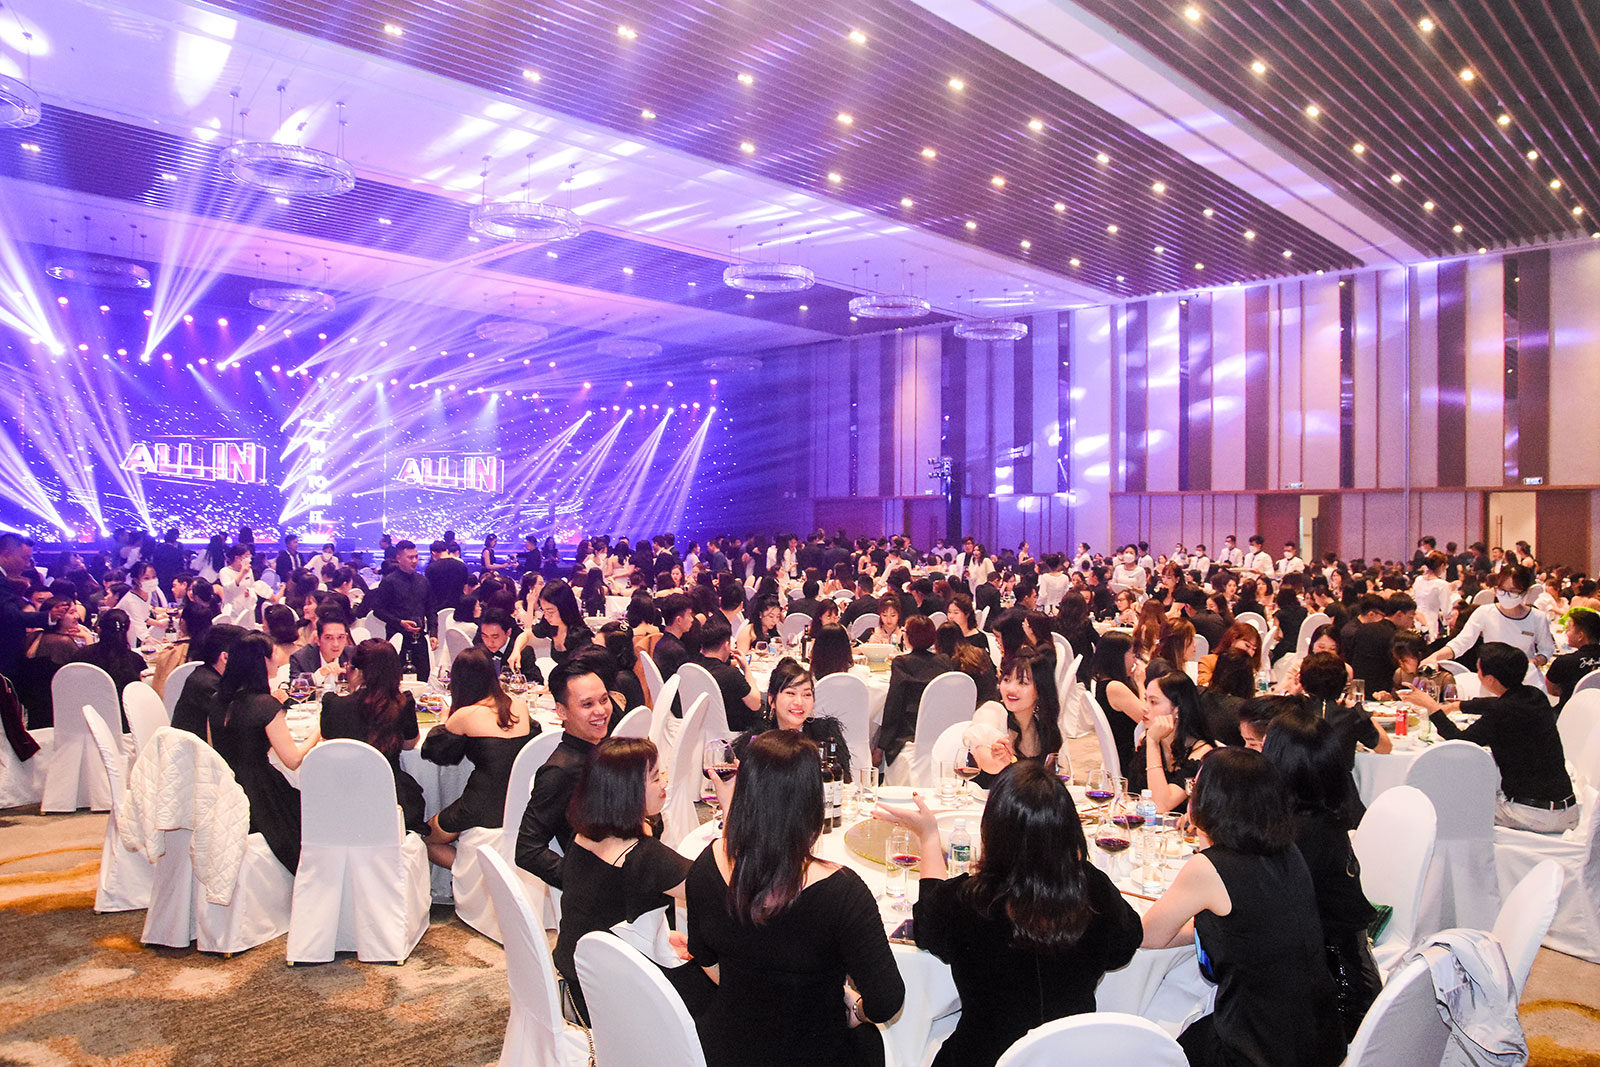 MB AGEAS ORANIZED EVENT “ALL IN – IN IT TO WIN IT” WITH MORE THAN 500 GUESTS